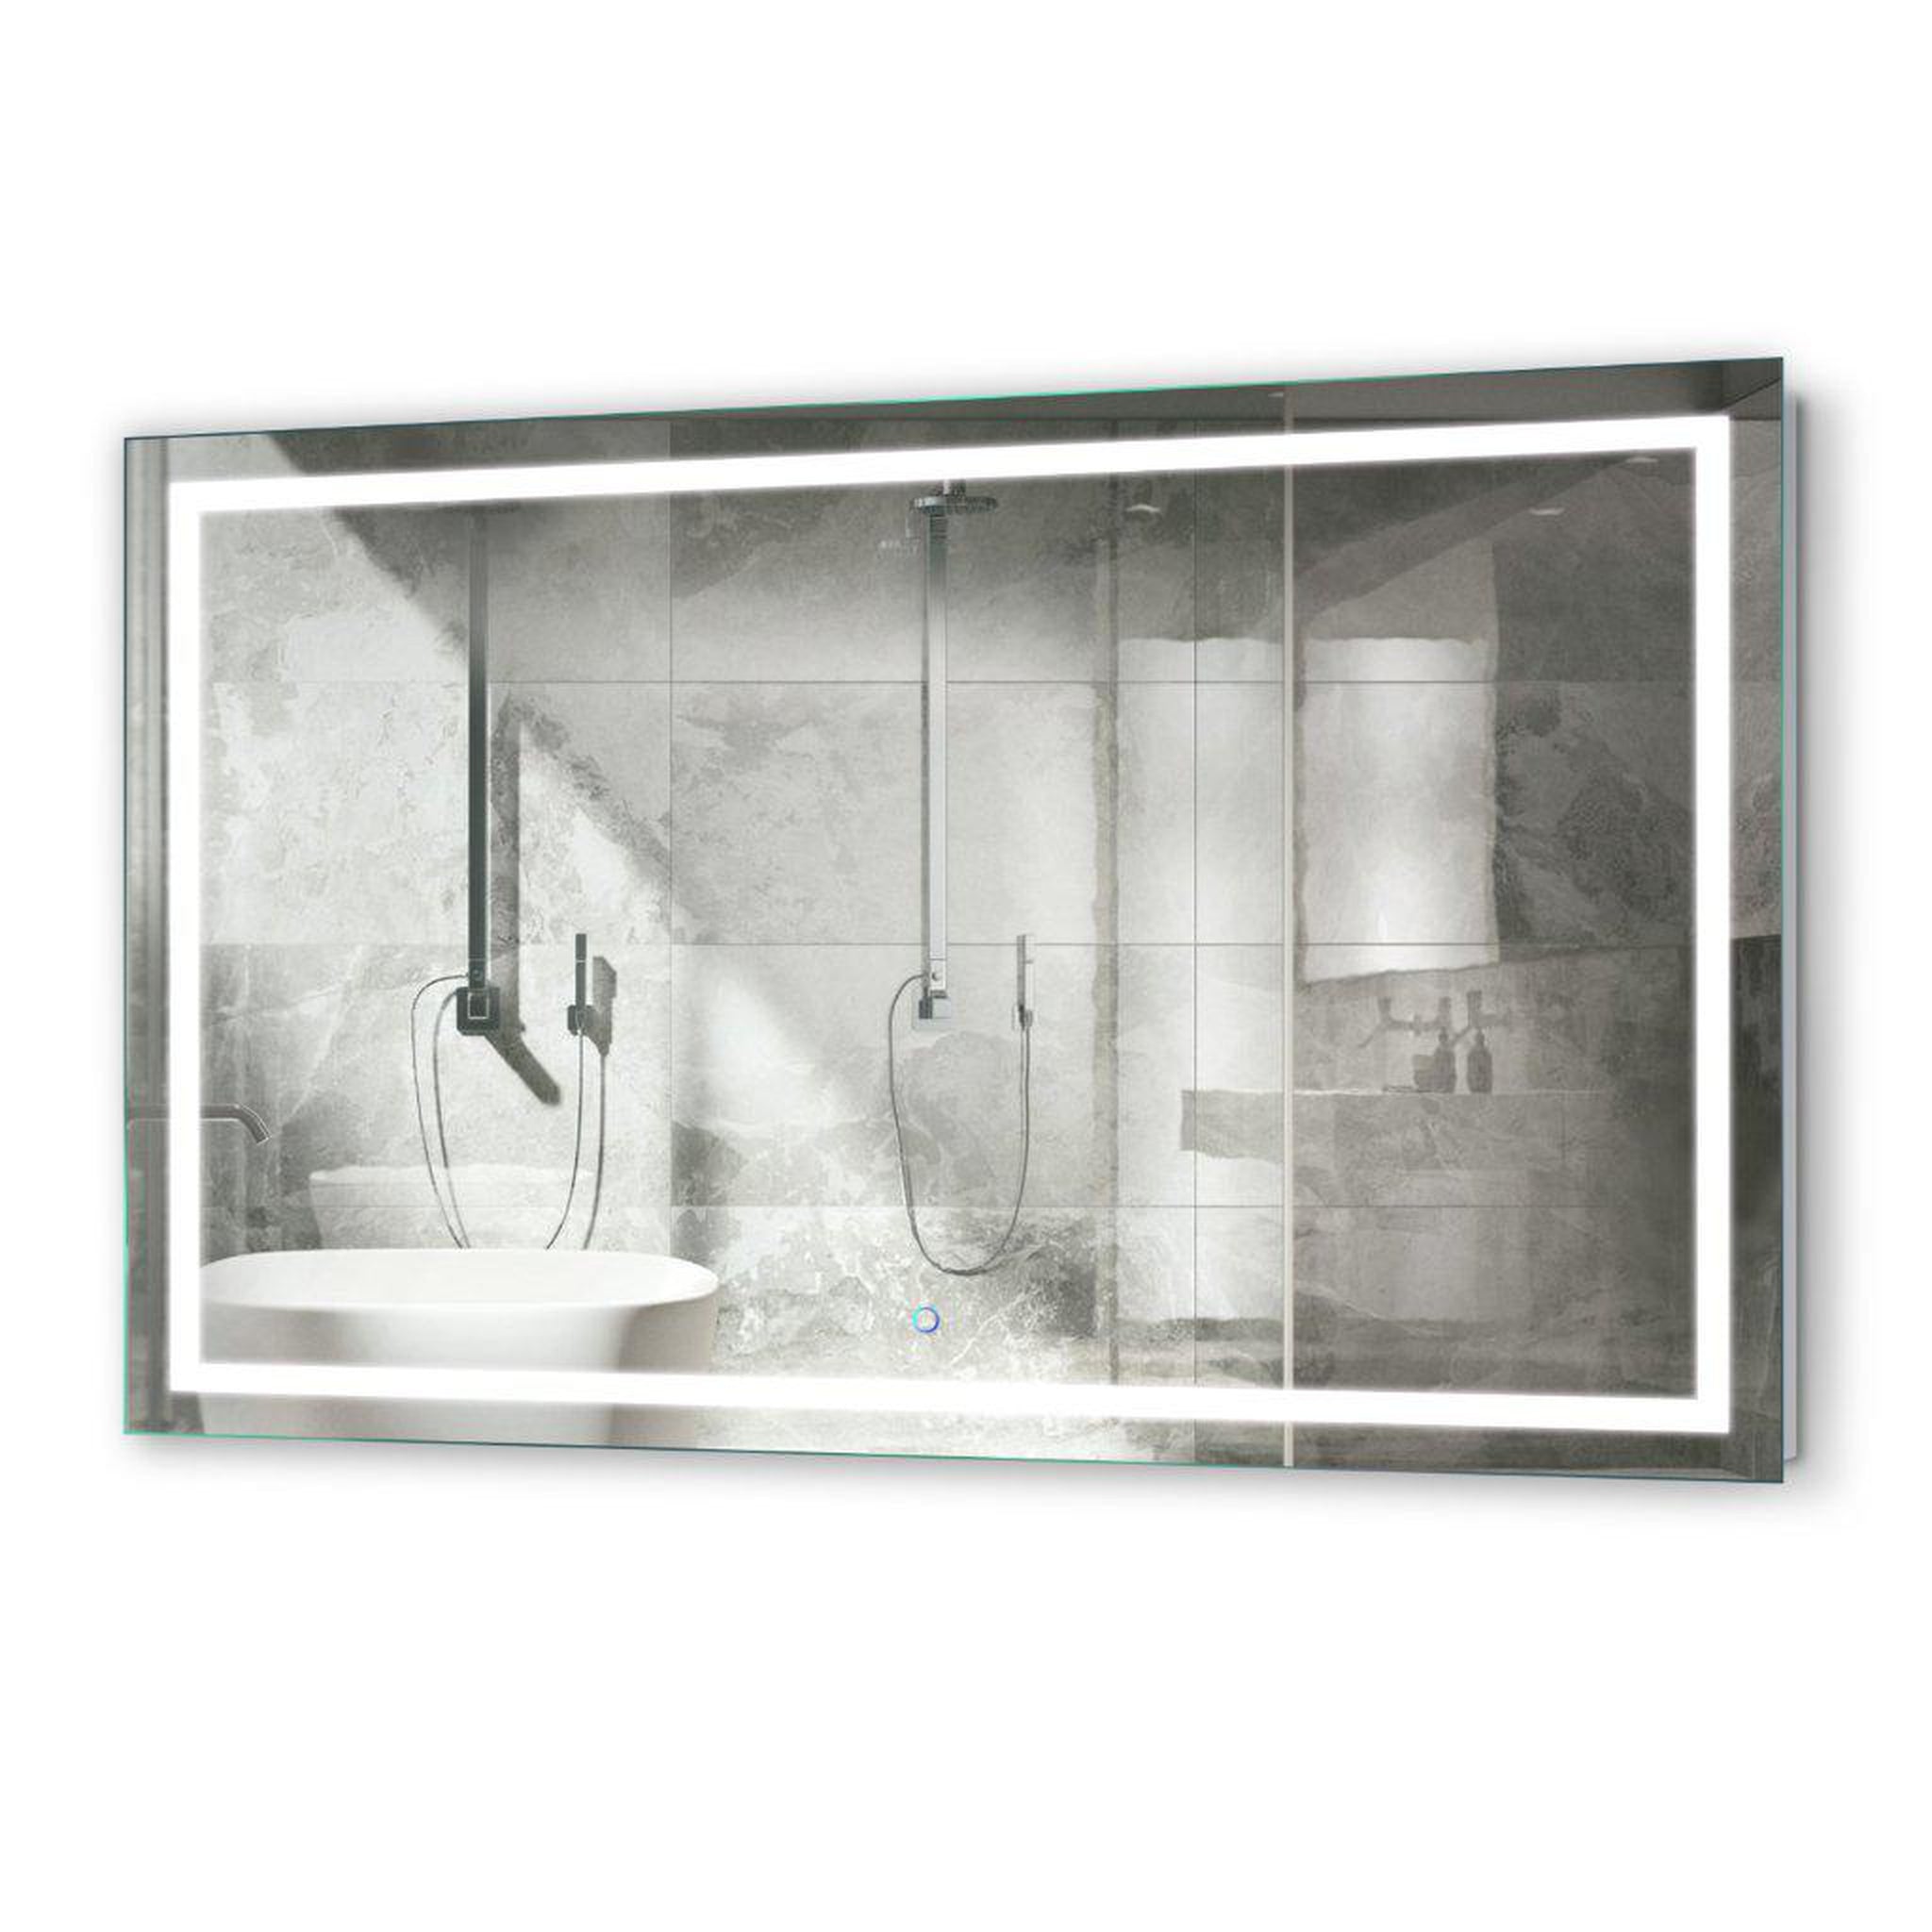 Krugg Reflections, Krugg Reflections Icon 54” x 36” 5000K Rectangular Wall-Mounted Illuminated Silver Backed LED  Mirror With Built-in Defogger and Touch Sensor On/Off Built-in Dimmer